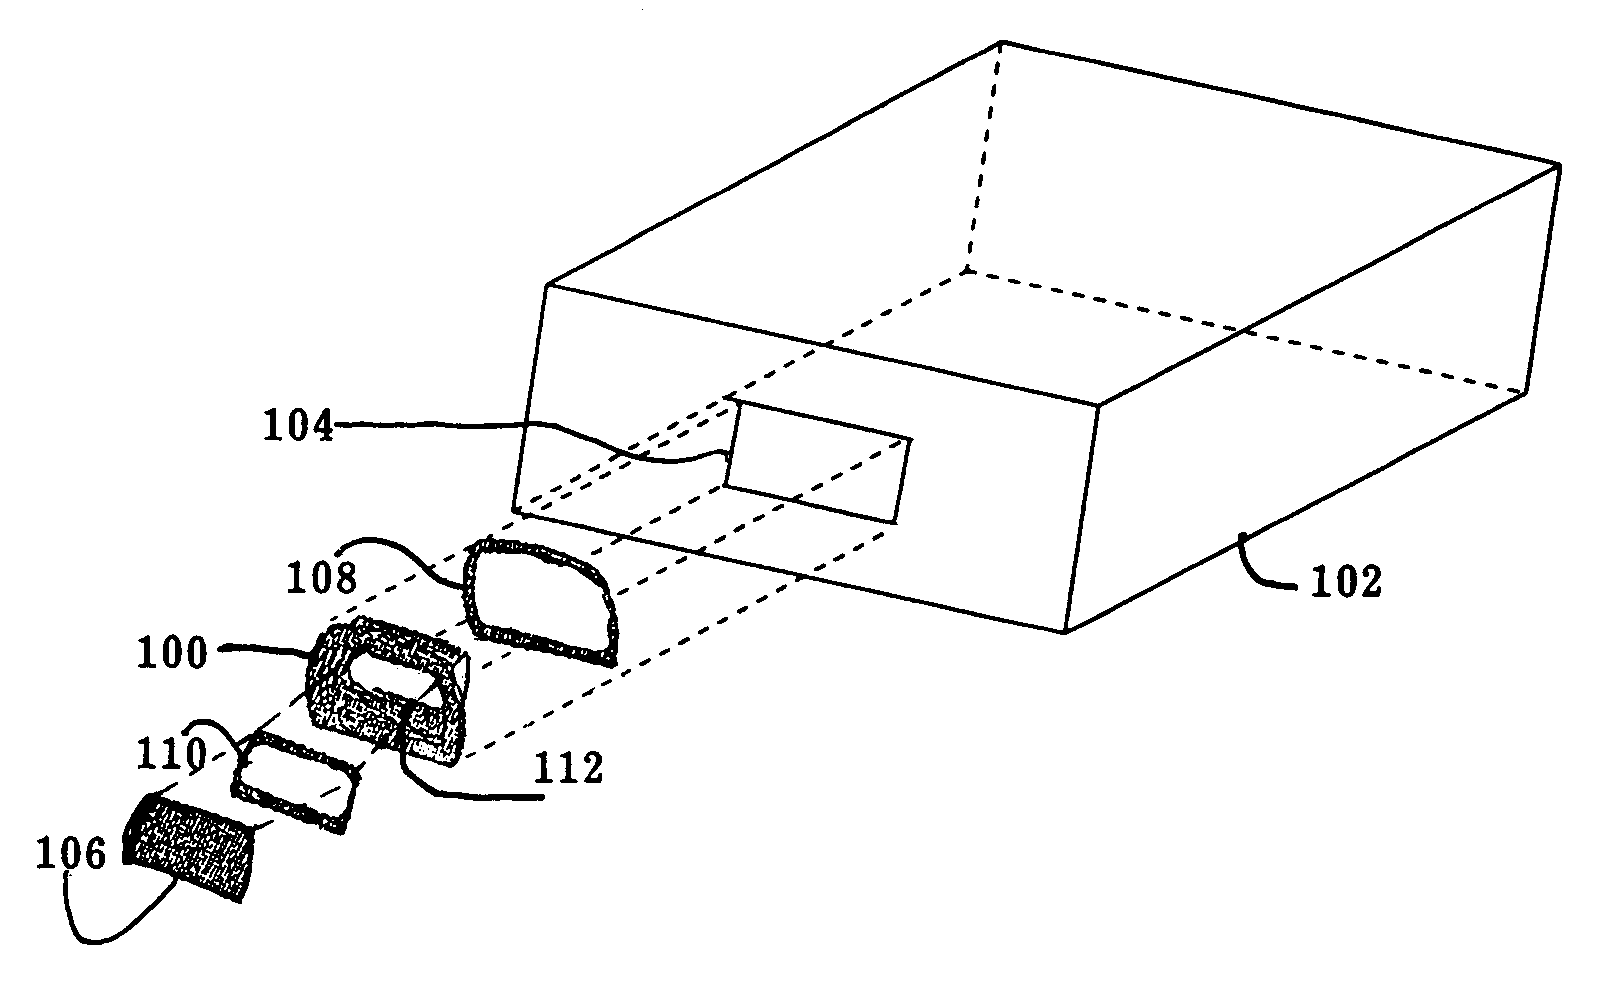 Versatile window system for information gathering systems